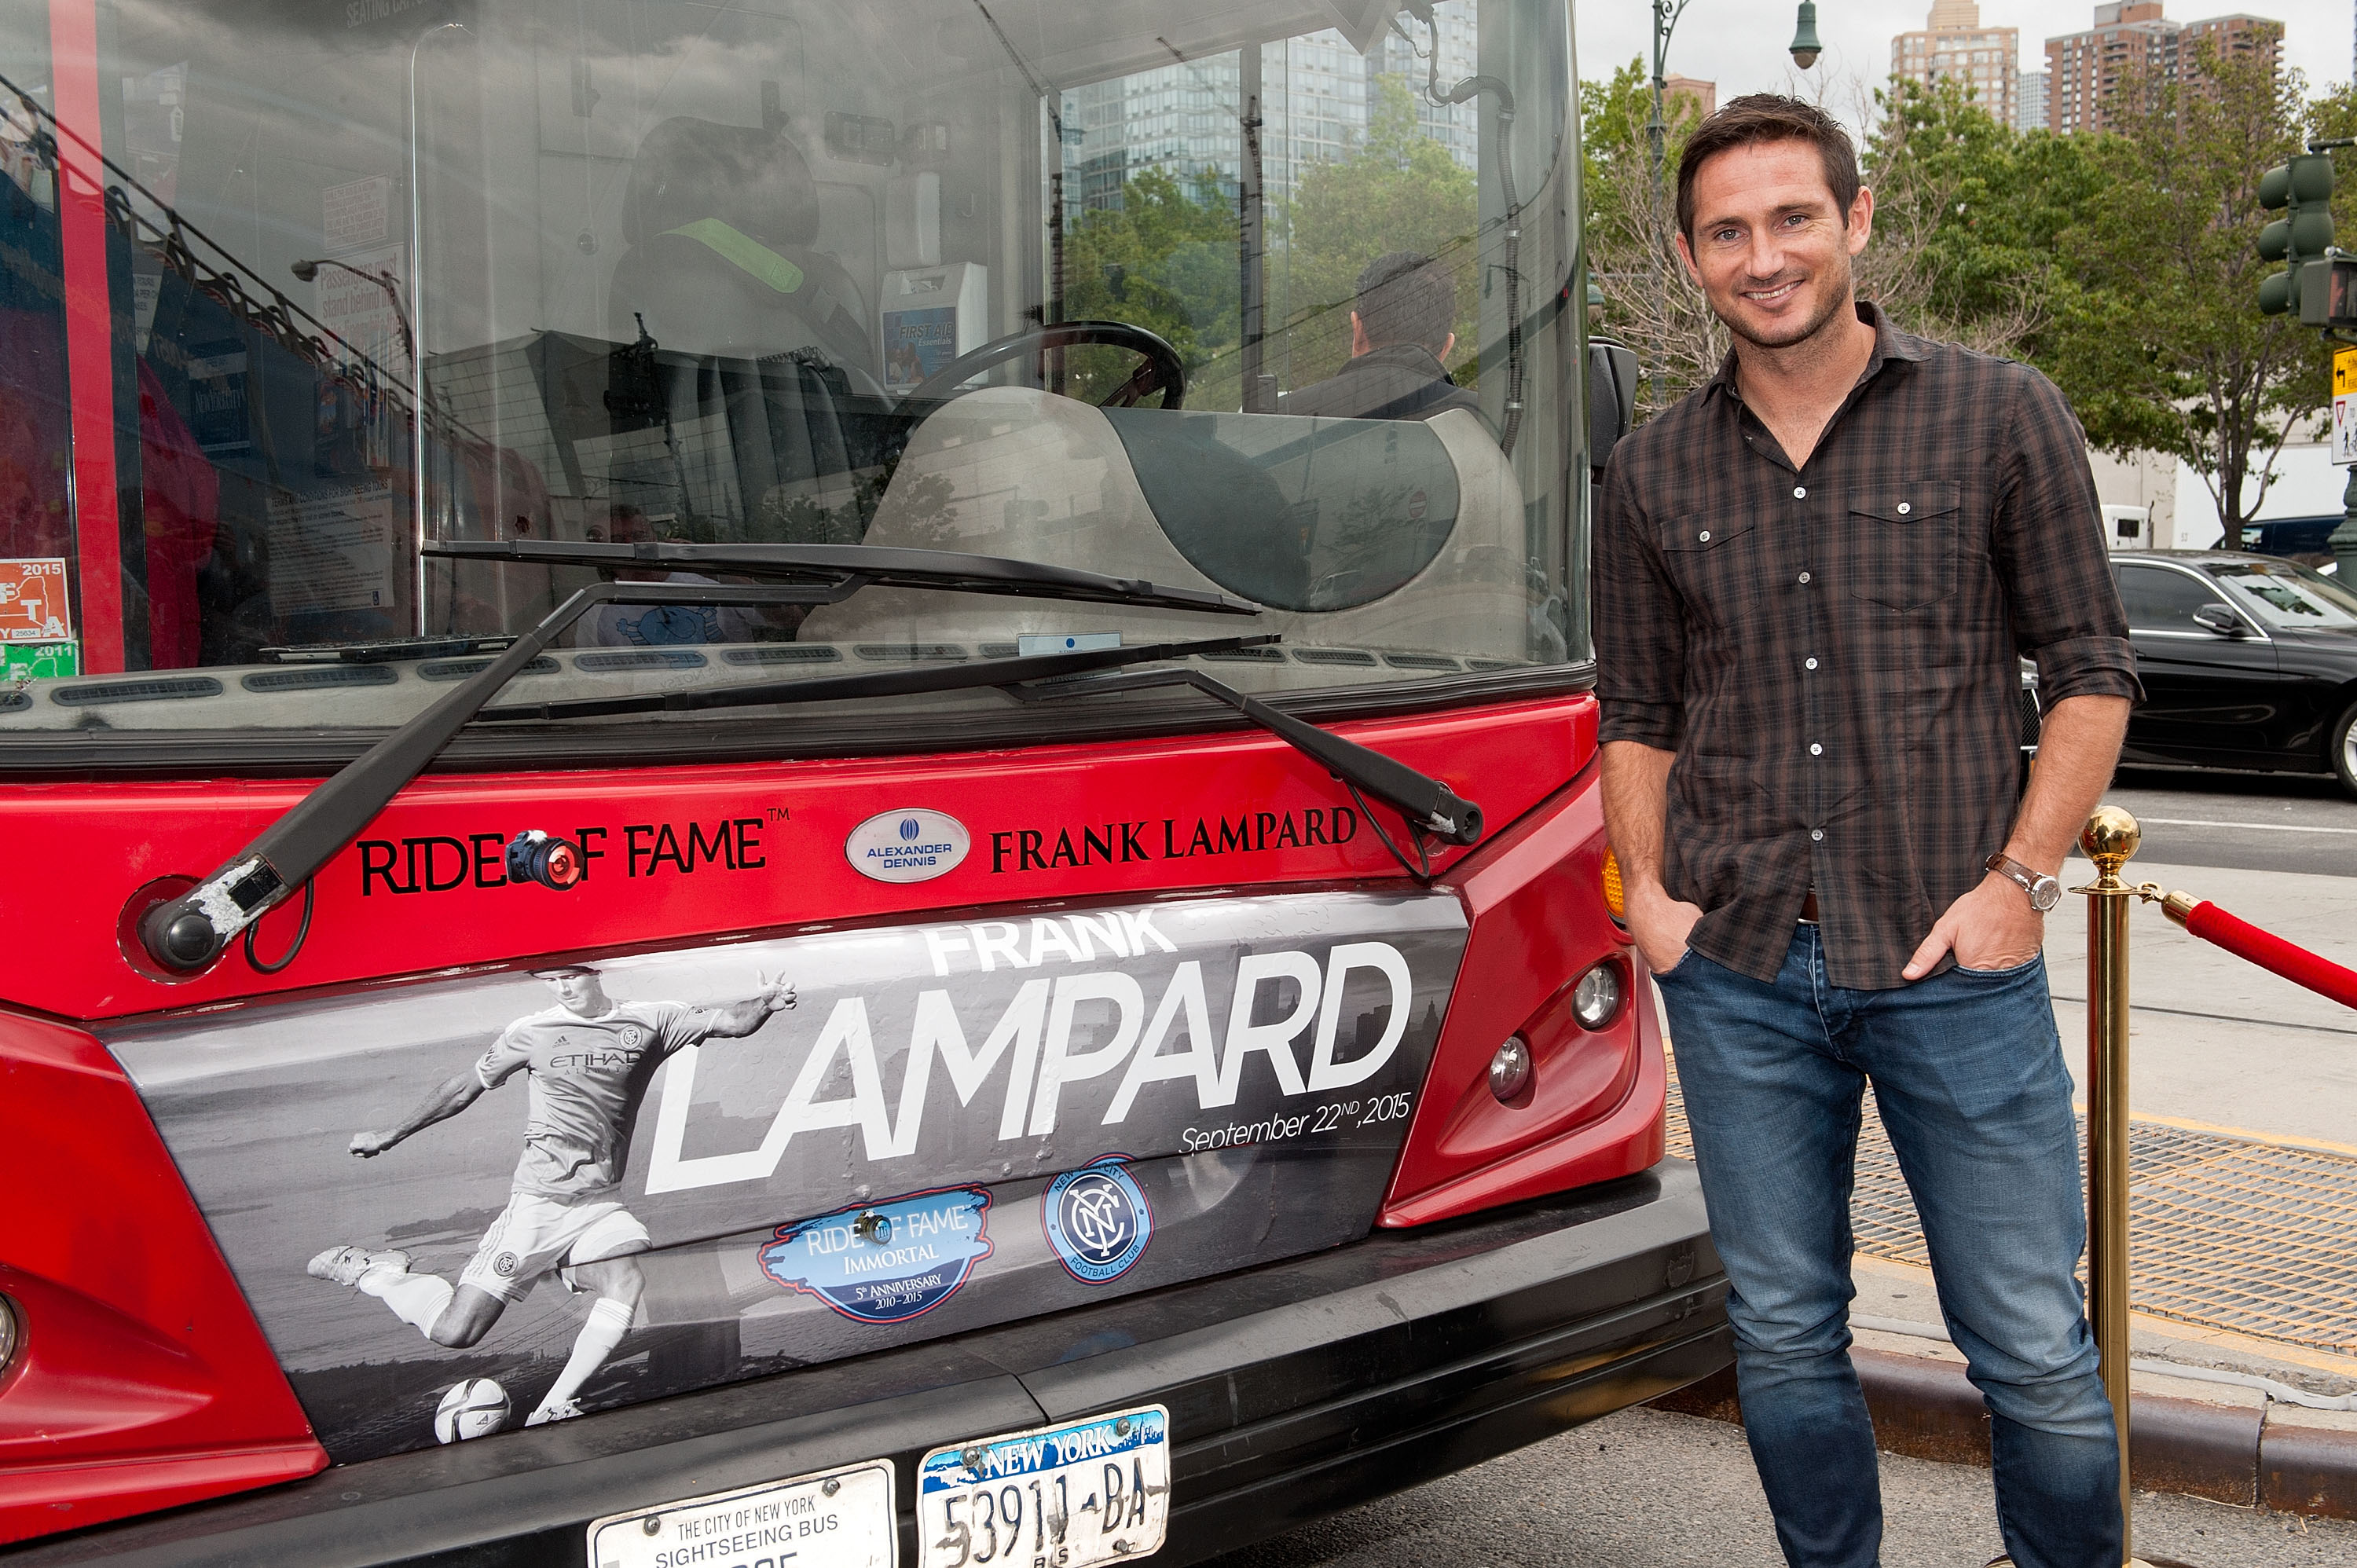 NEW YORK, NY - SEPTEMBER 22: Professional footballer Frank Lampard attends the New York City Football Club Ride of Fame Induction Ceremony at Pier 78 on September 22, 2015 in New York City. (Photo by D Dipasupil/Getty Images for Ride of Fame)